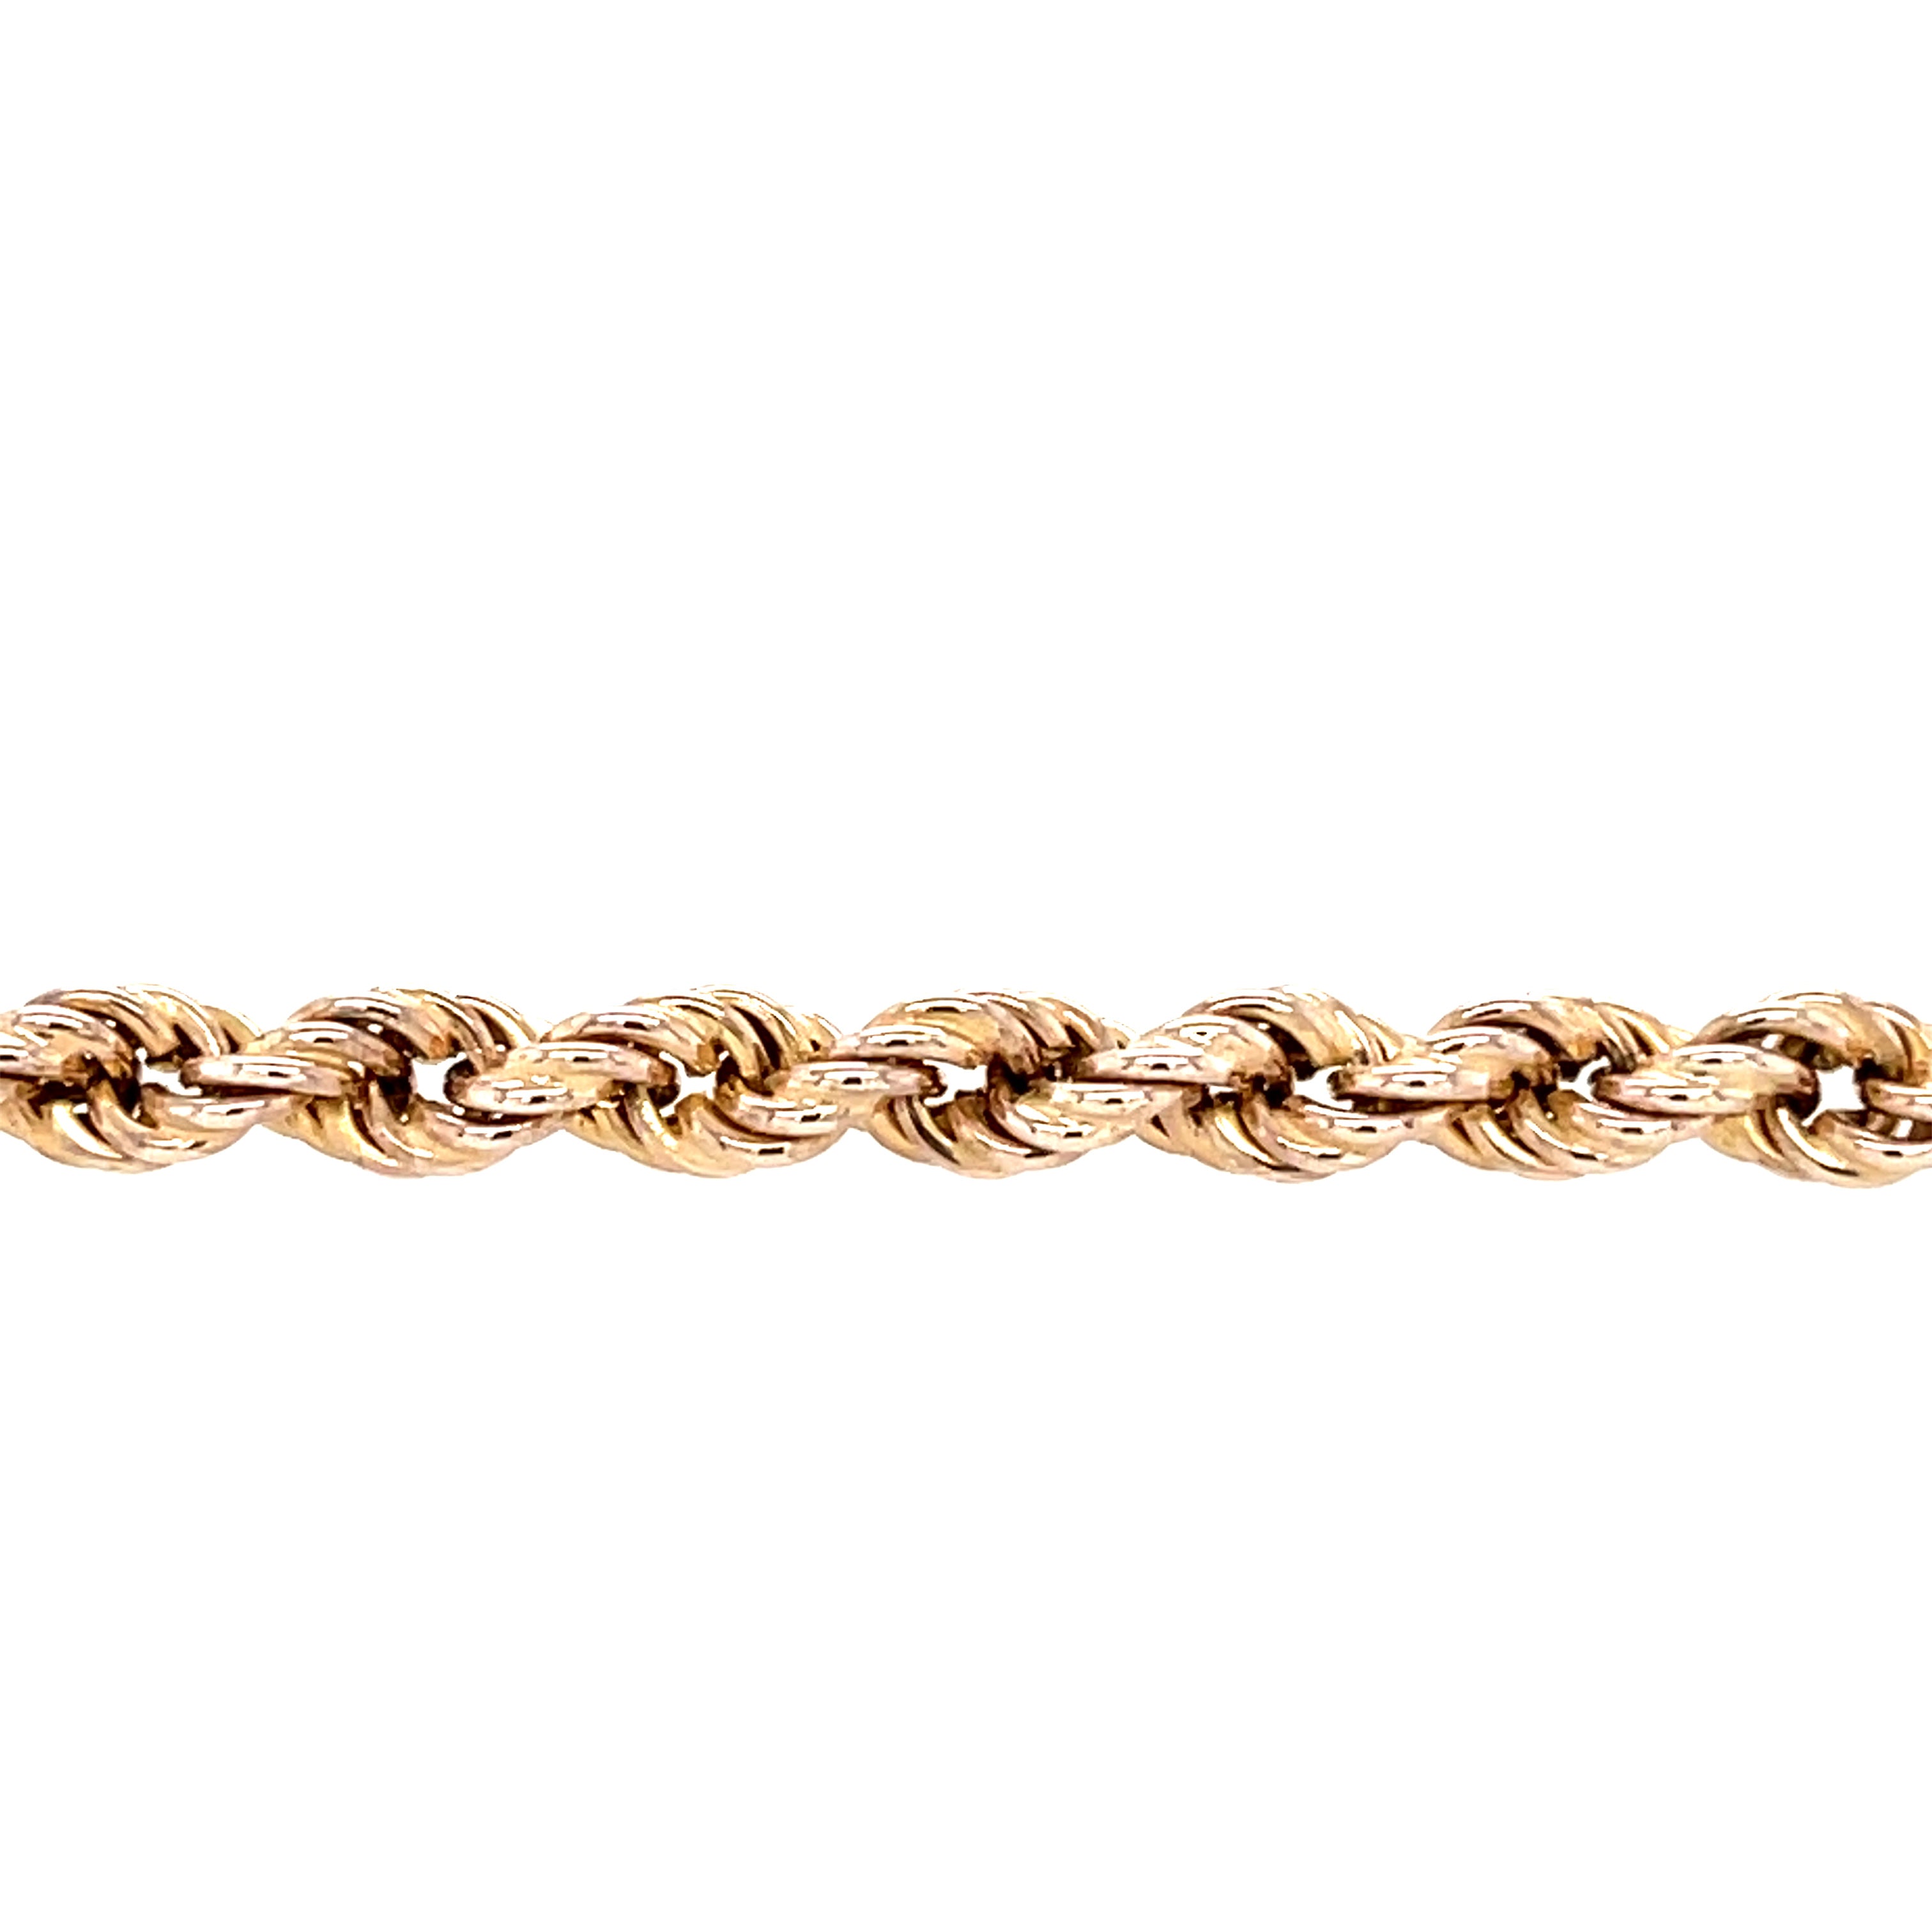 9ct Yellow Gold 7.5" Hollow Rope Bracelet - 5.55g SOLD